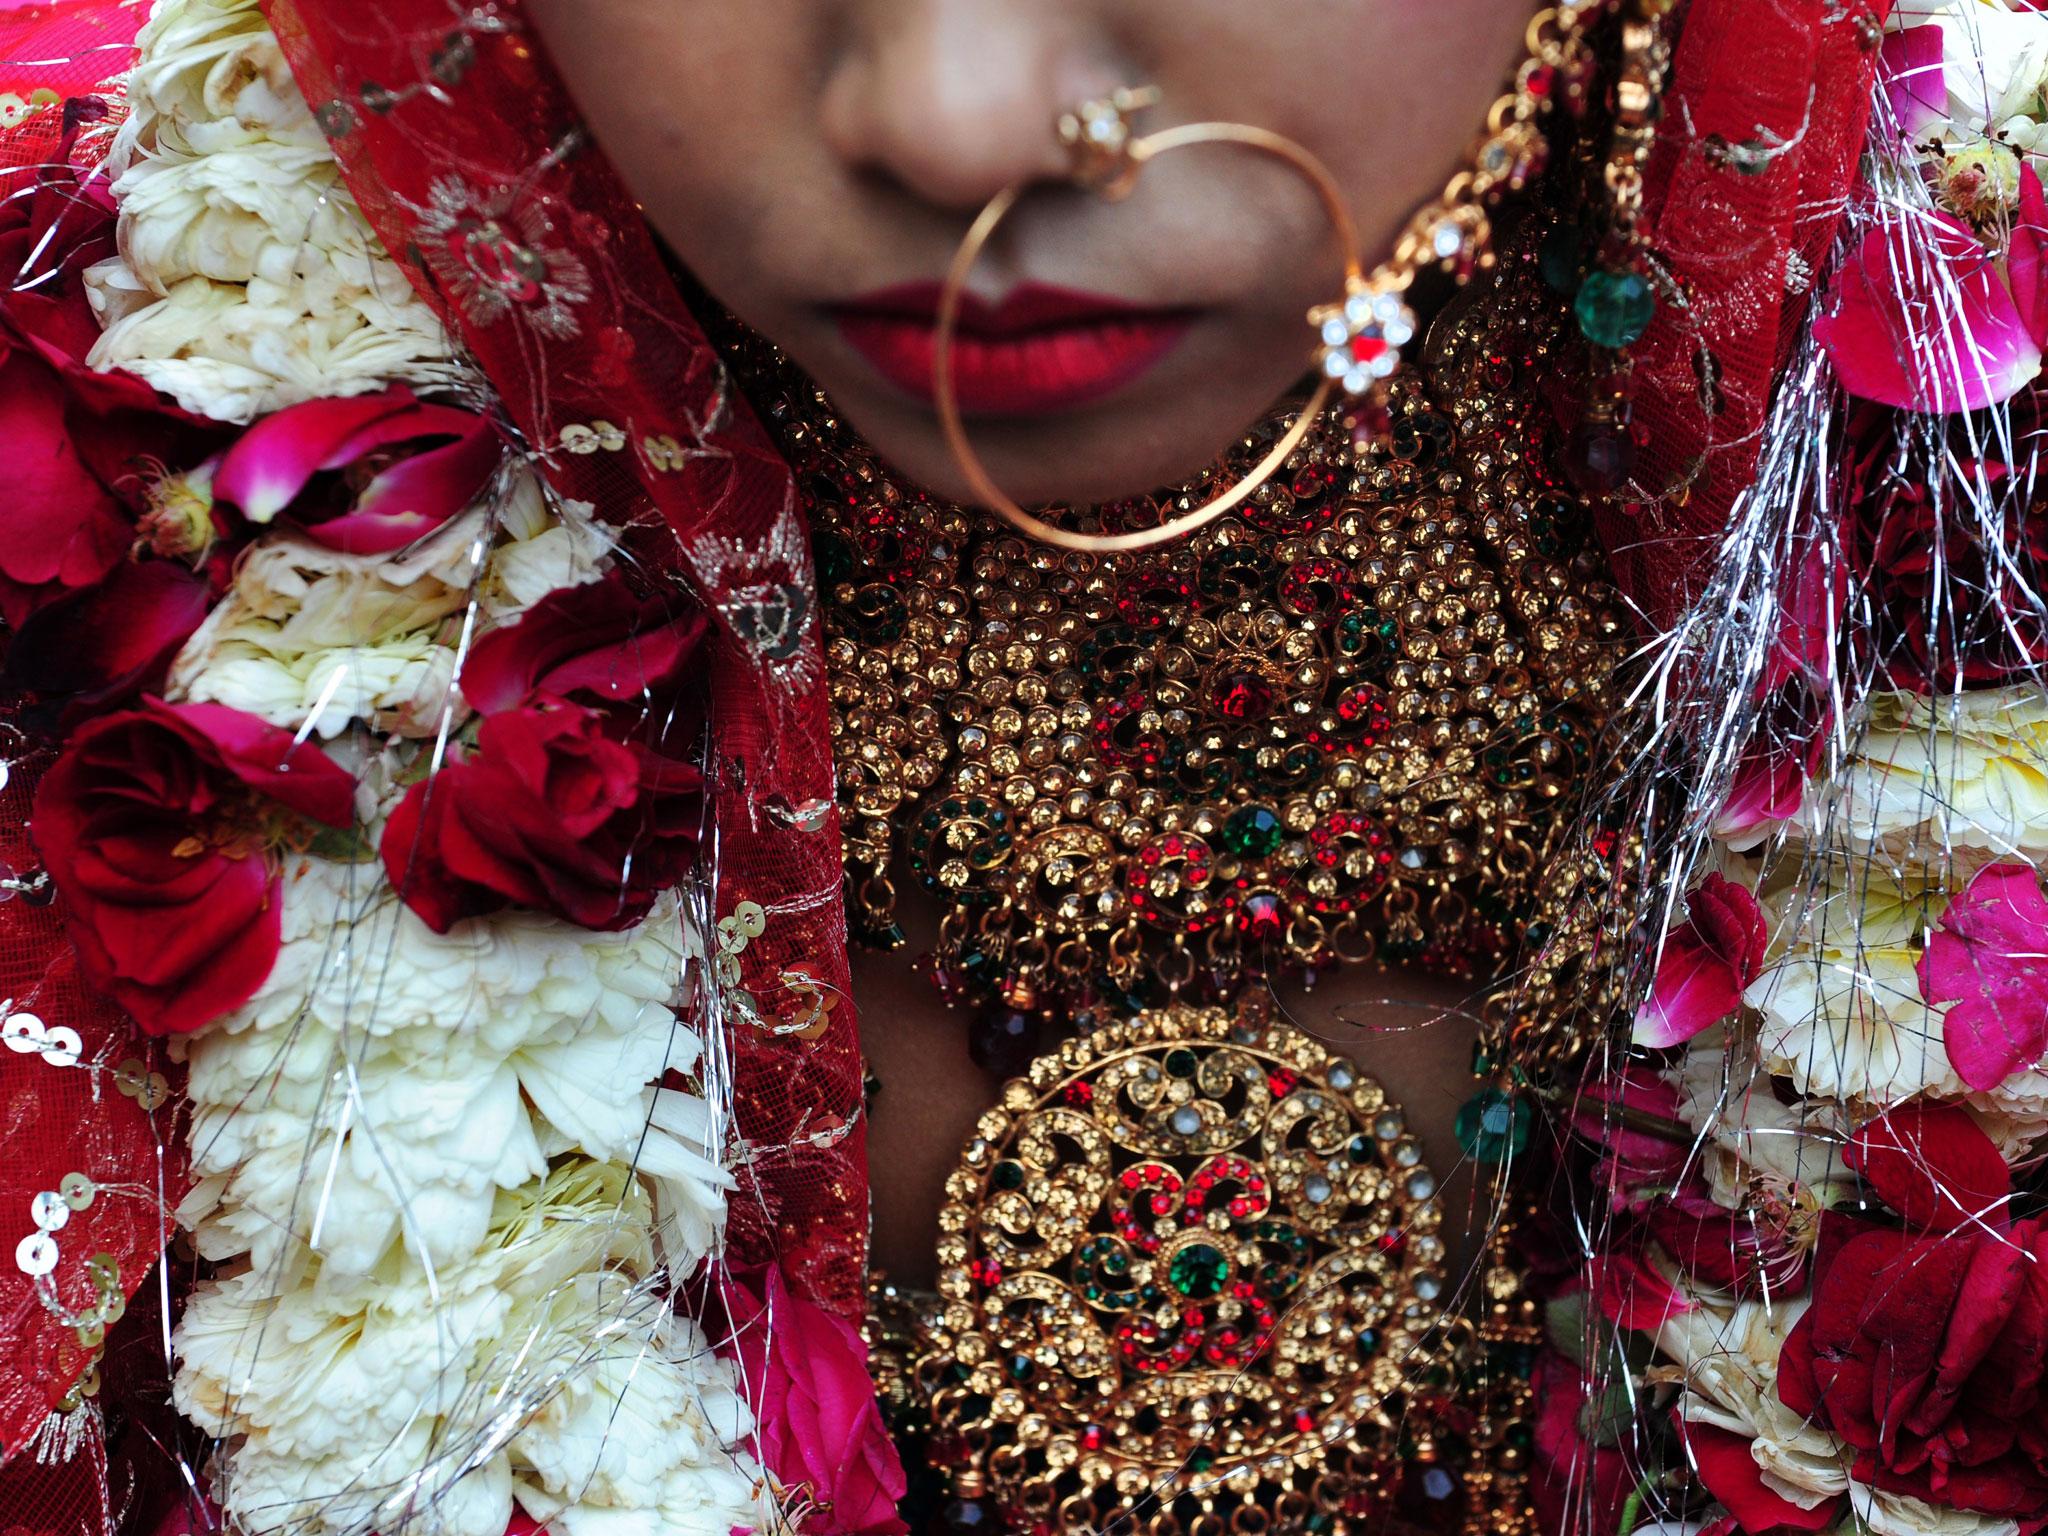 An Indian bride wears decorations during a wedding ceremony